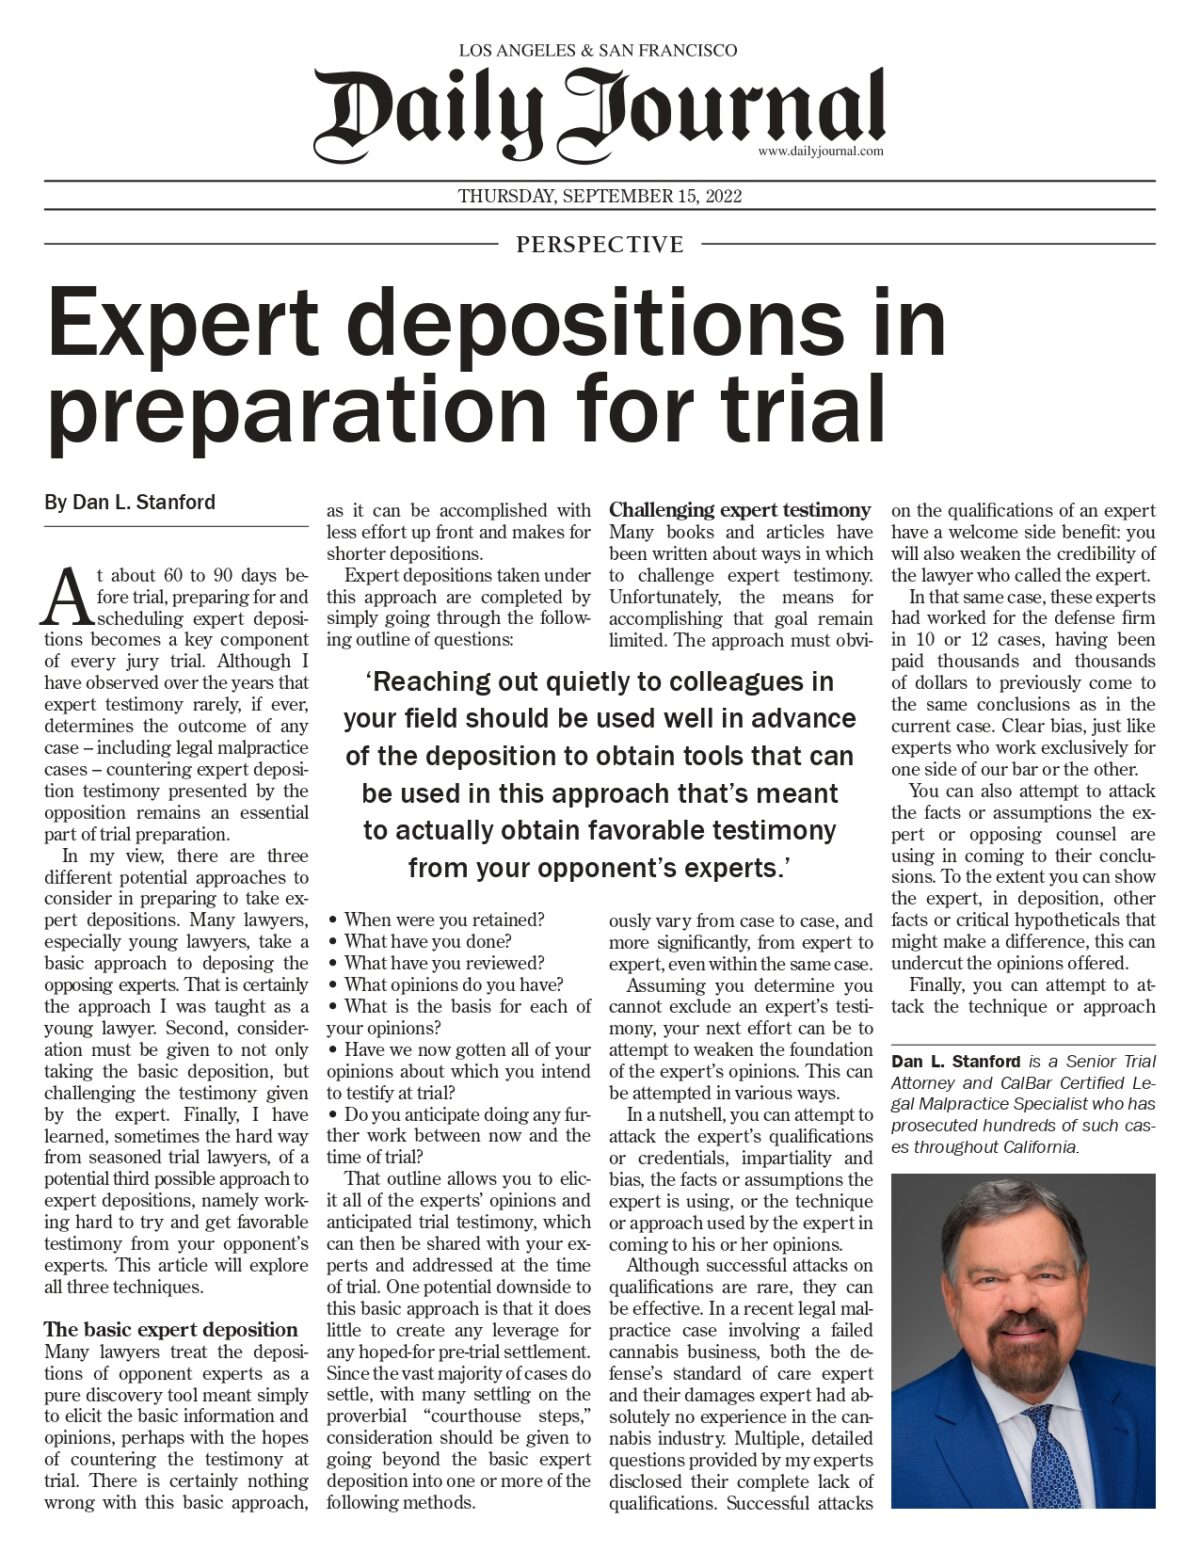 Expert depositions in preparation for trial